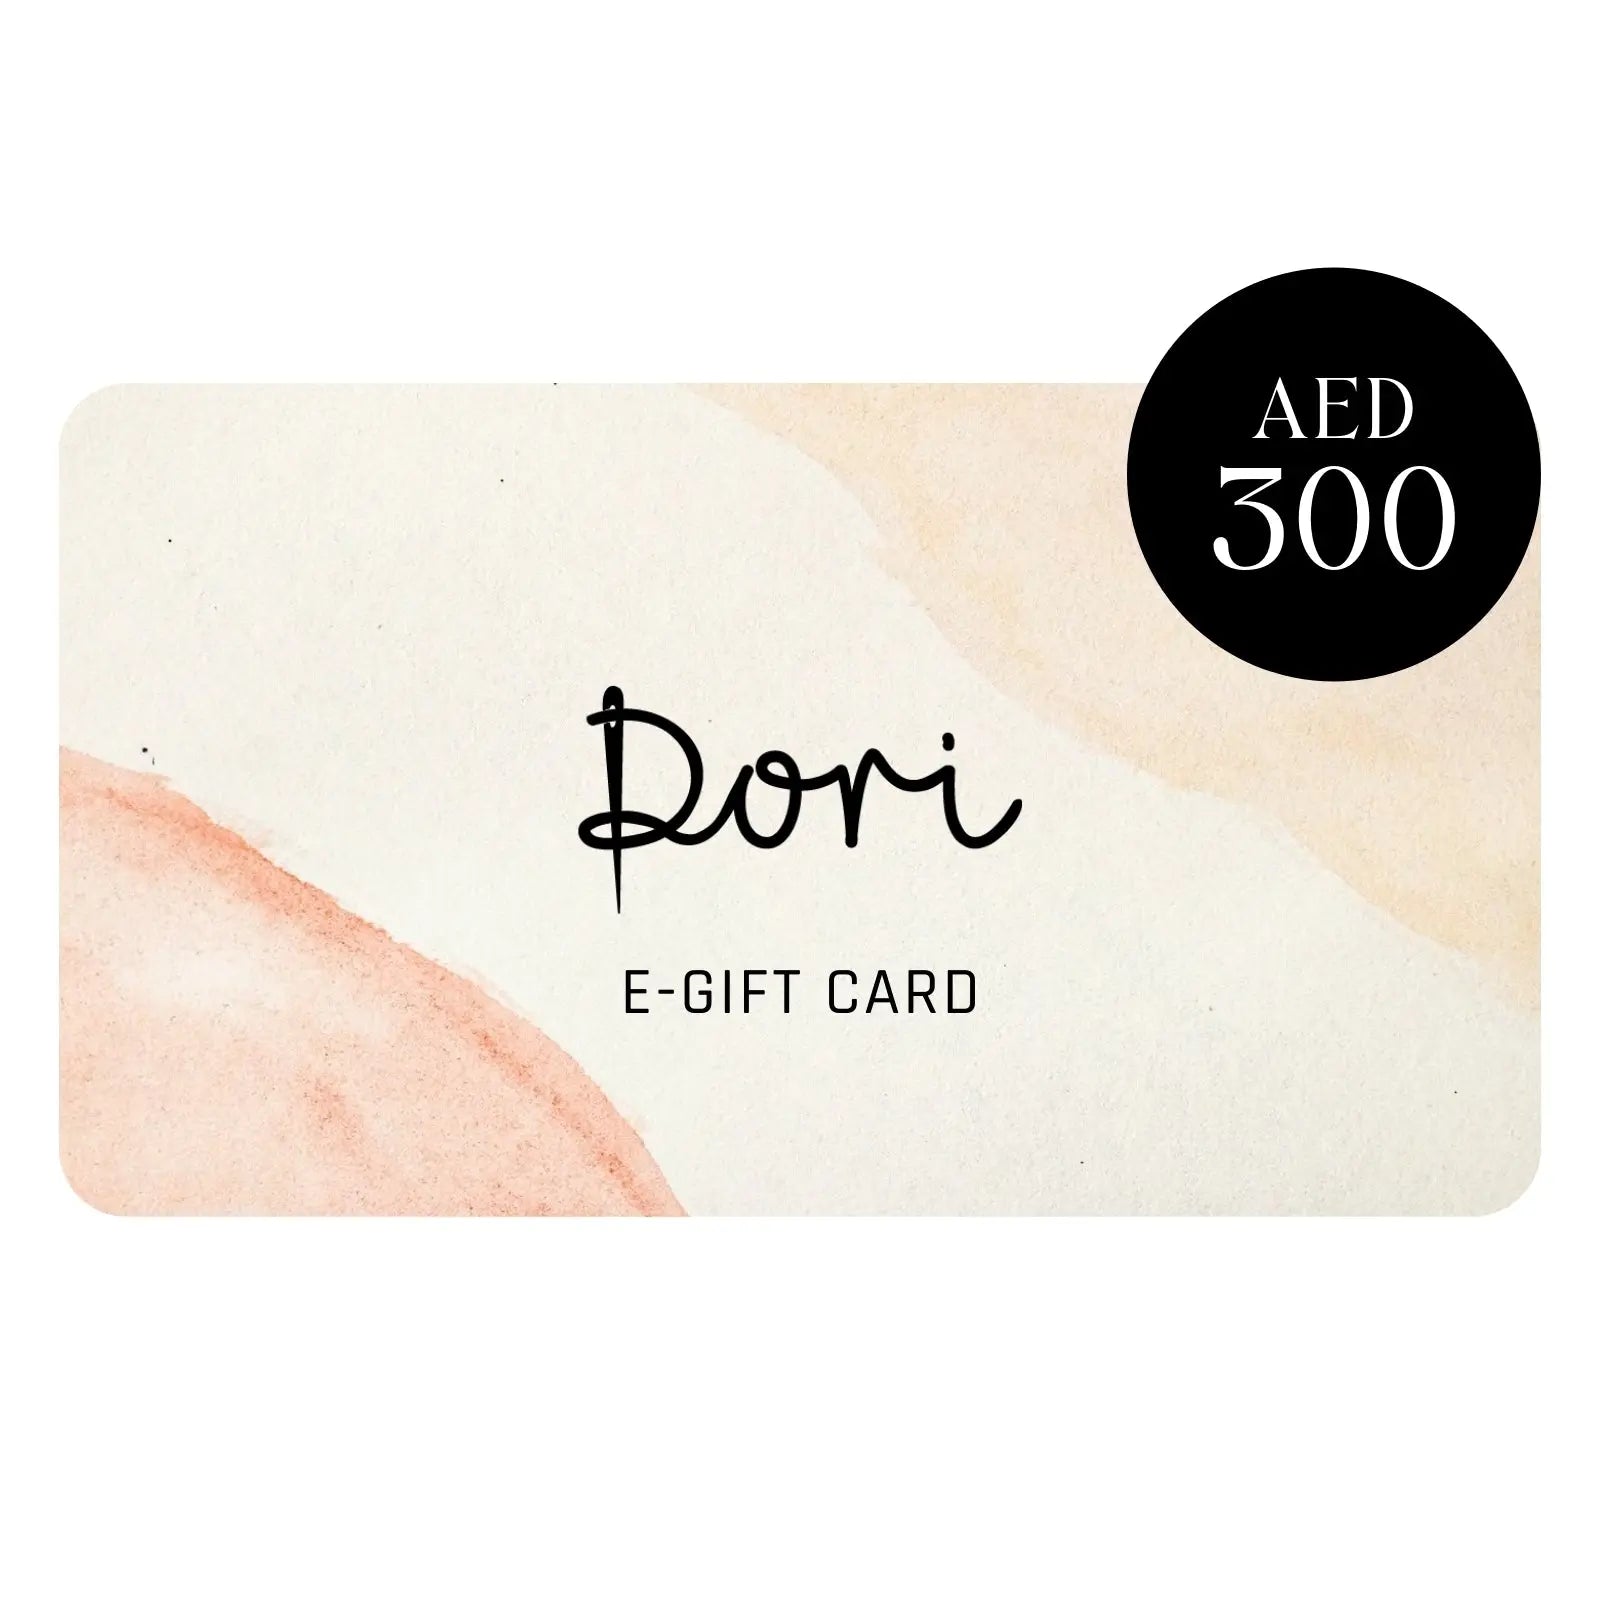 E-Gift Card (AED 300)- Handcrafted Jewellery from Dori